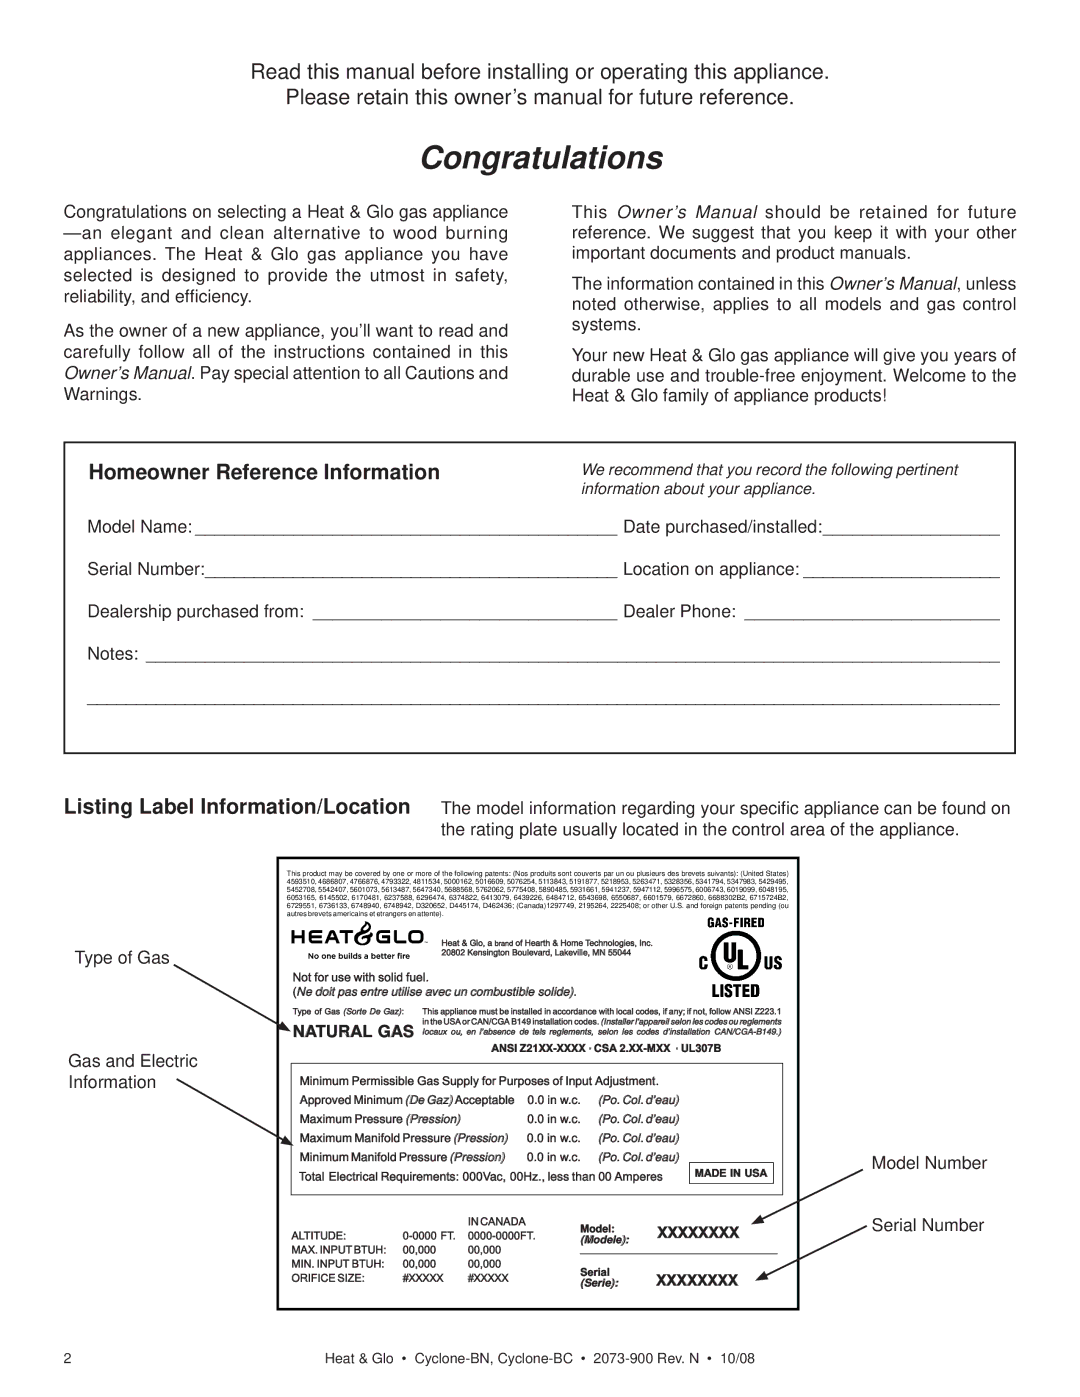 Hearth and Home Technologies Cyclone-BC, Cyclone-BN owner manual Congratulations, Homeowner Reference Information 